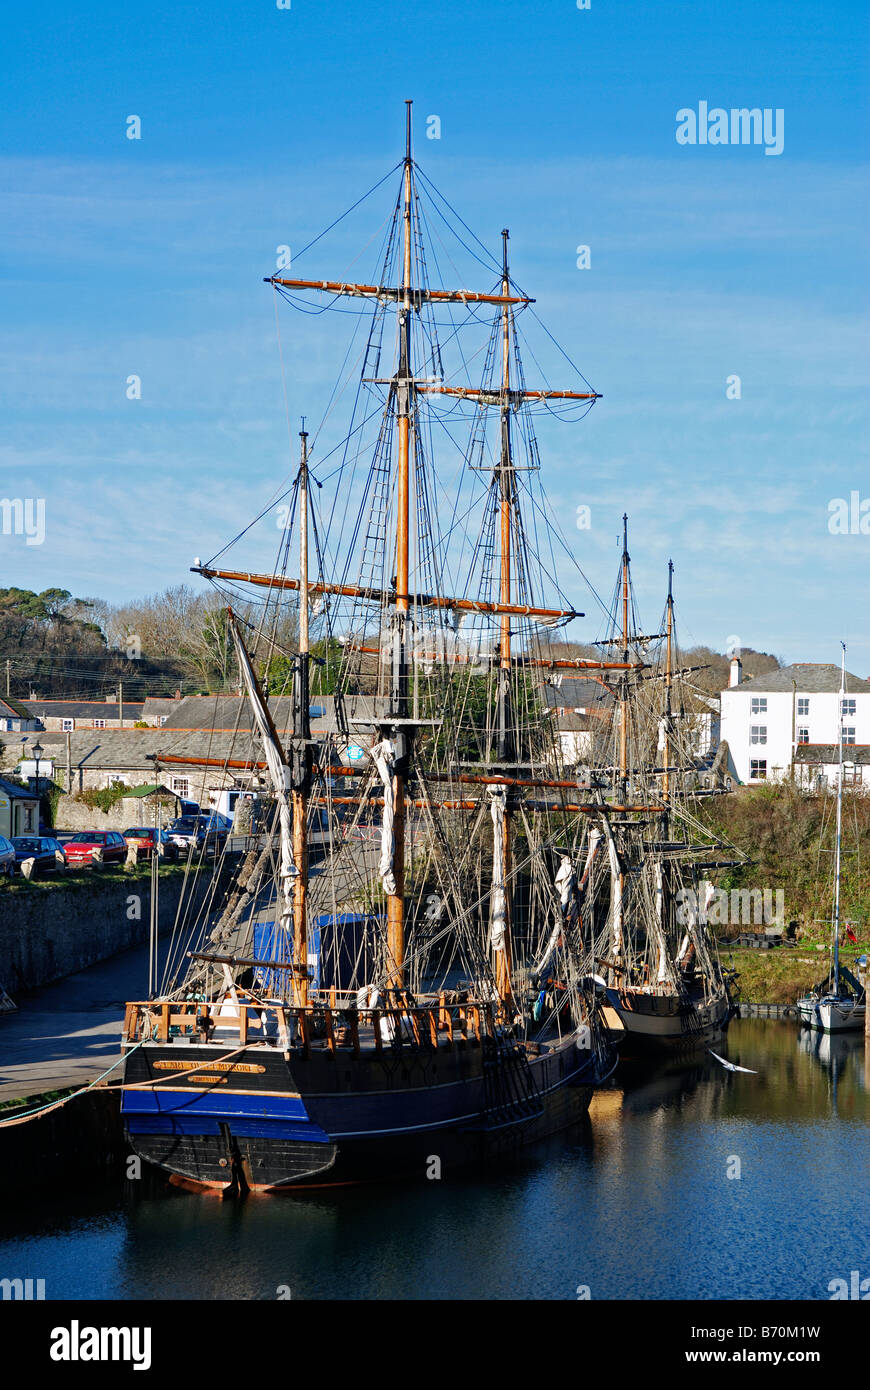 a tall ship berthed in the harbour at charlestown,cornwall,uk Stock Photo